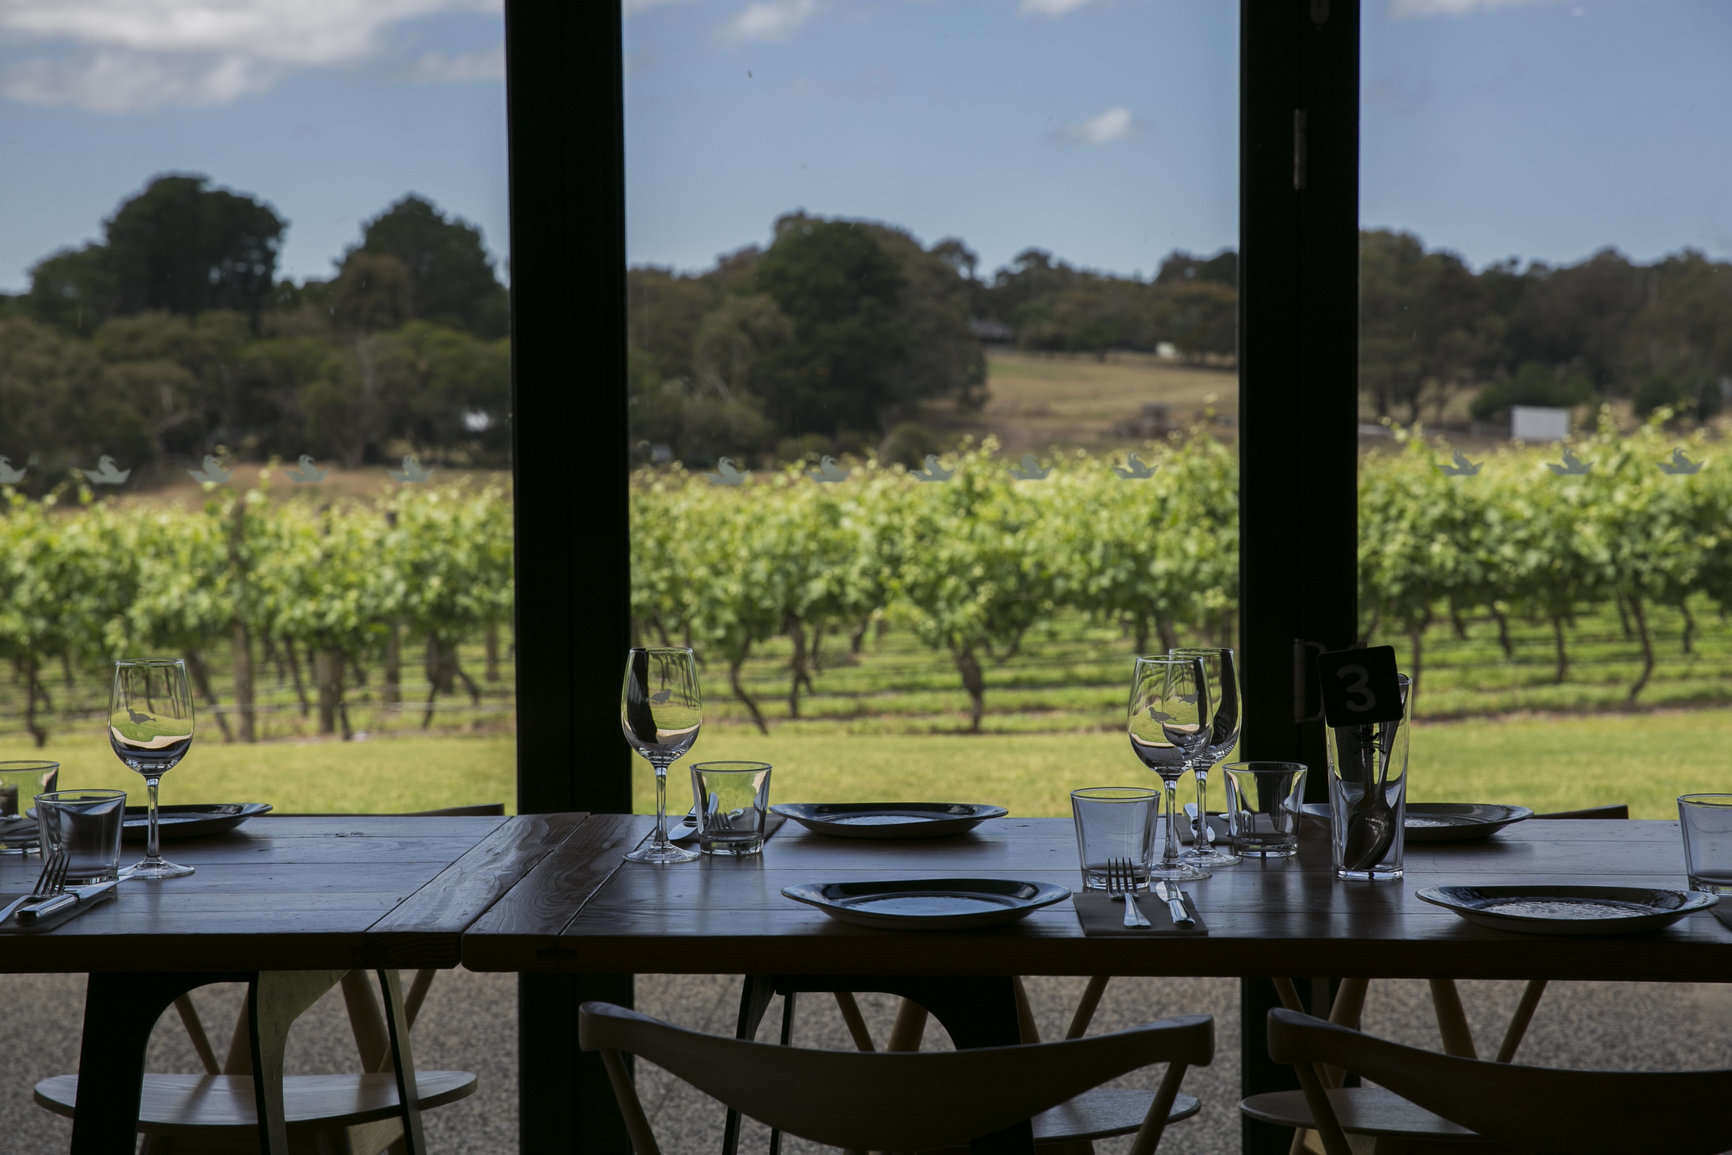 With more Irish consumers eating out and enjoying wine with their meals, for both the on- and off-trade in Ireland Australian wines enjoy second place behind Chile in terms of country of origin sales with a 17.7% share of domestic wine market consumption. [Parker Blain/Wine Australia]